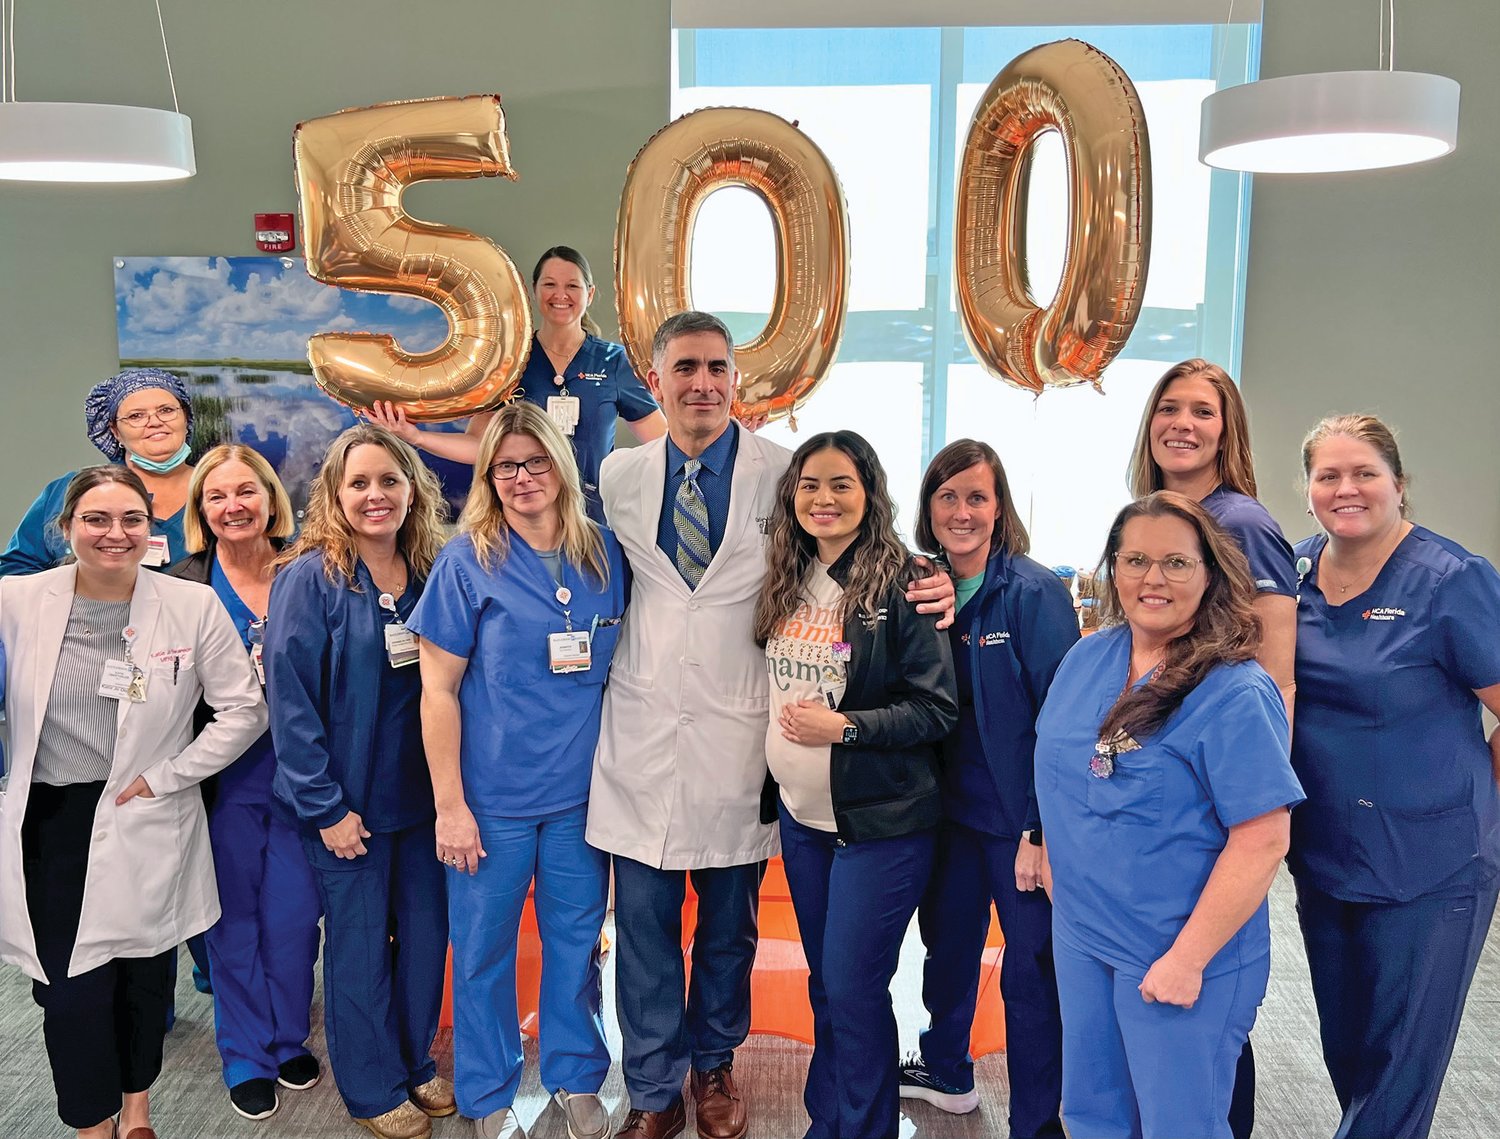 HCA Raulerson Hospital physician completes 500 robotic-assisted surgeries.